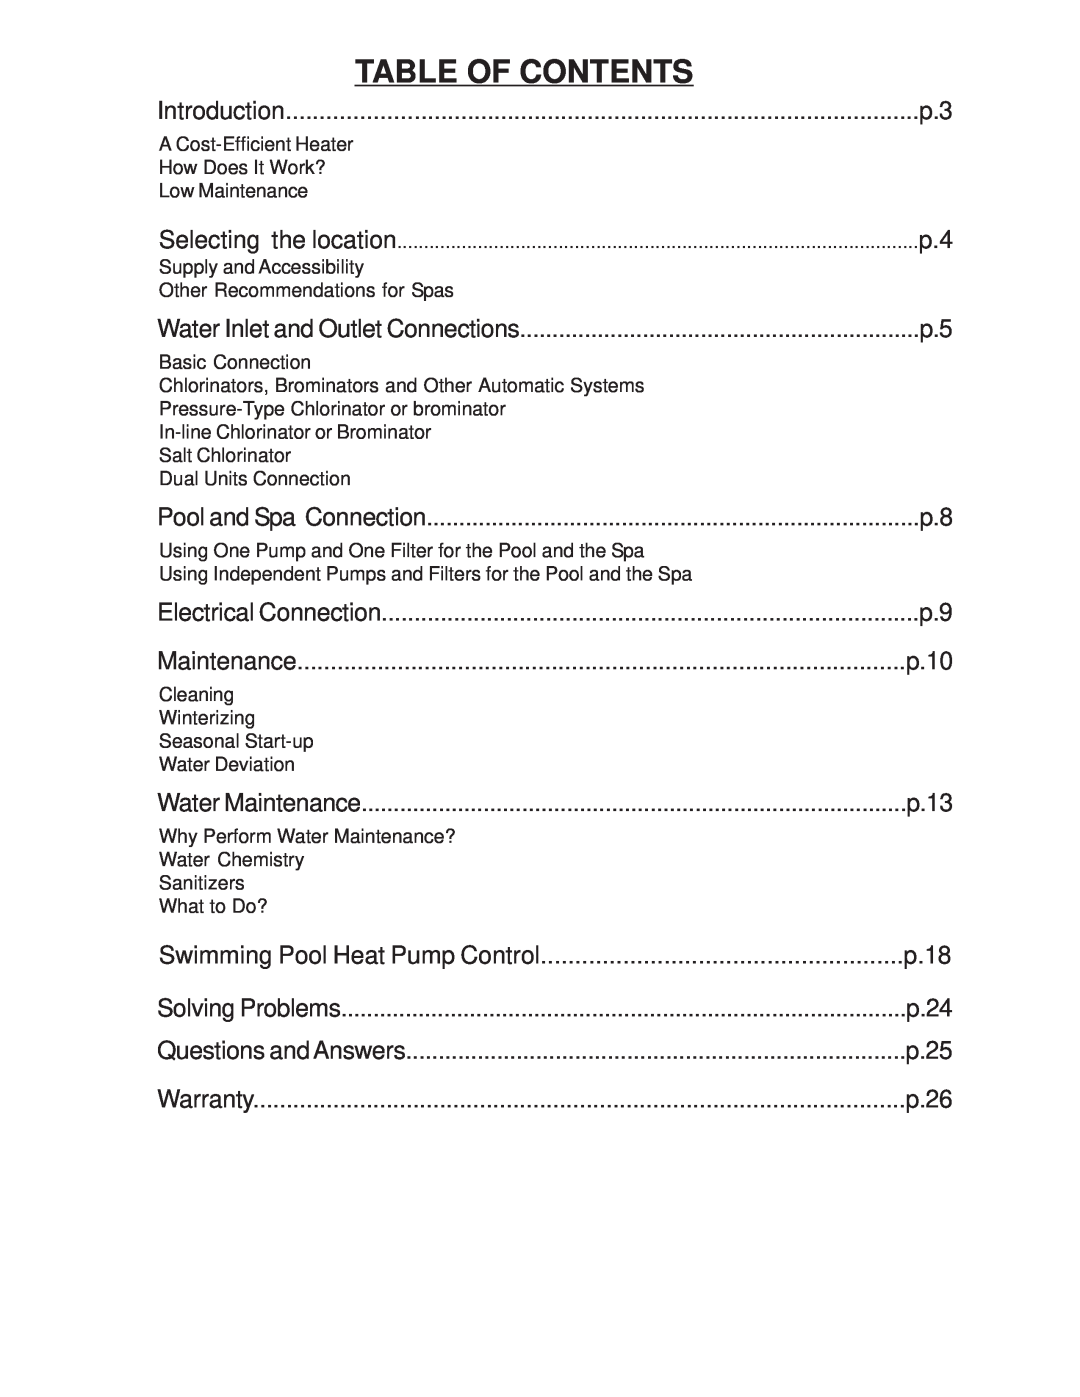 Taylor Table Of Contents, Introduction, Maintenance, Swimming Pool Heat Pump Control, p.10, p.13, p.18, p.24, p.25 